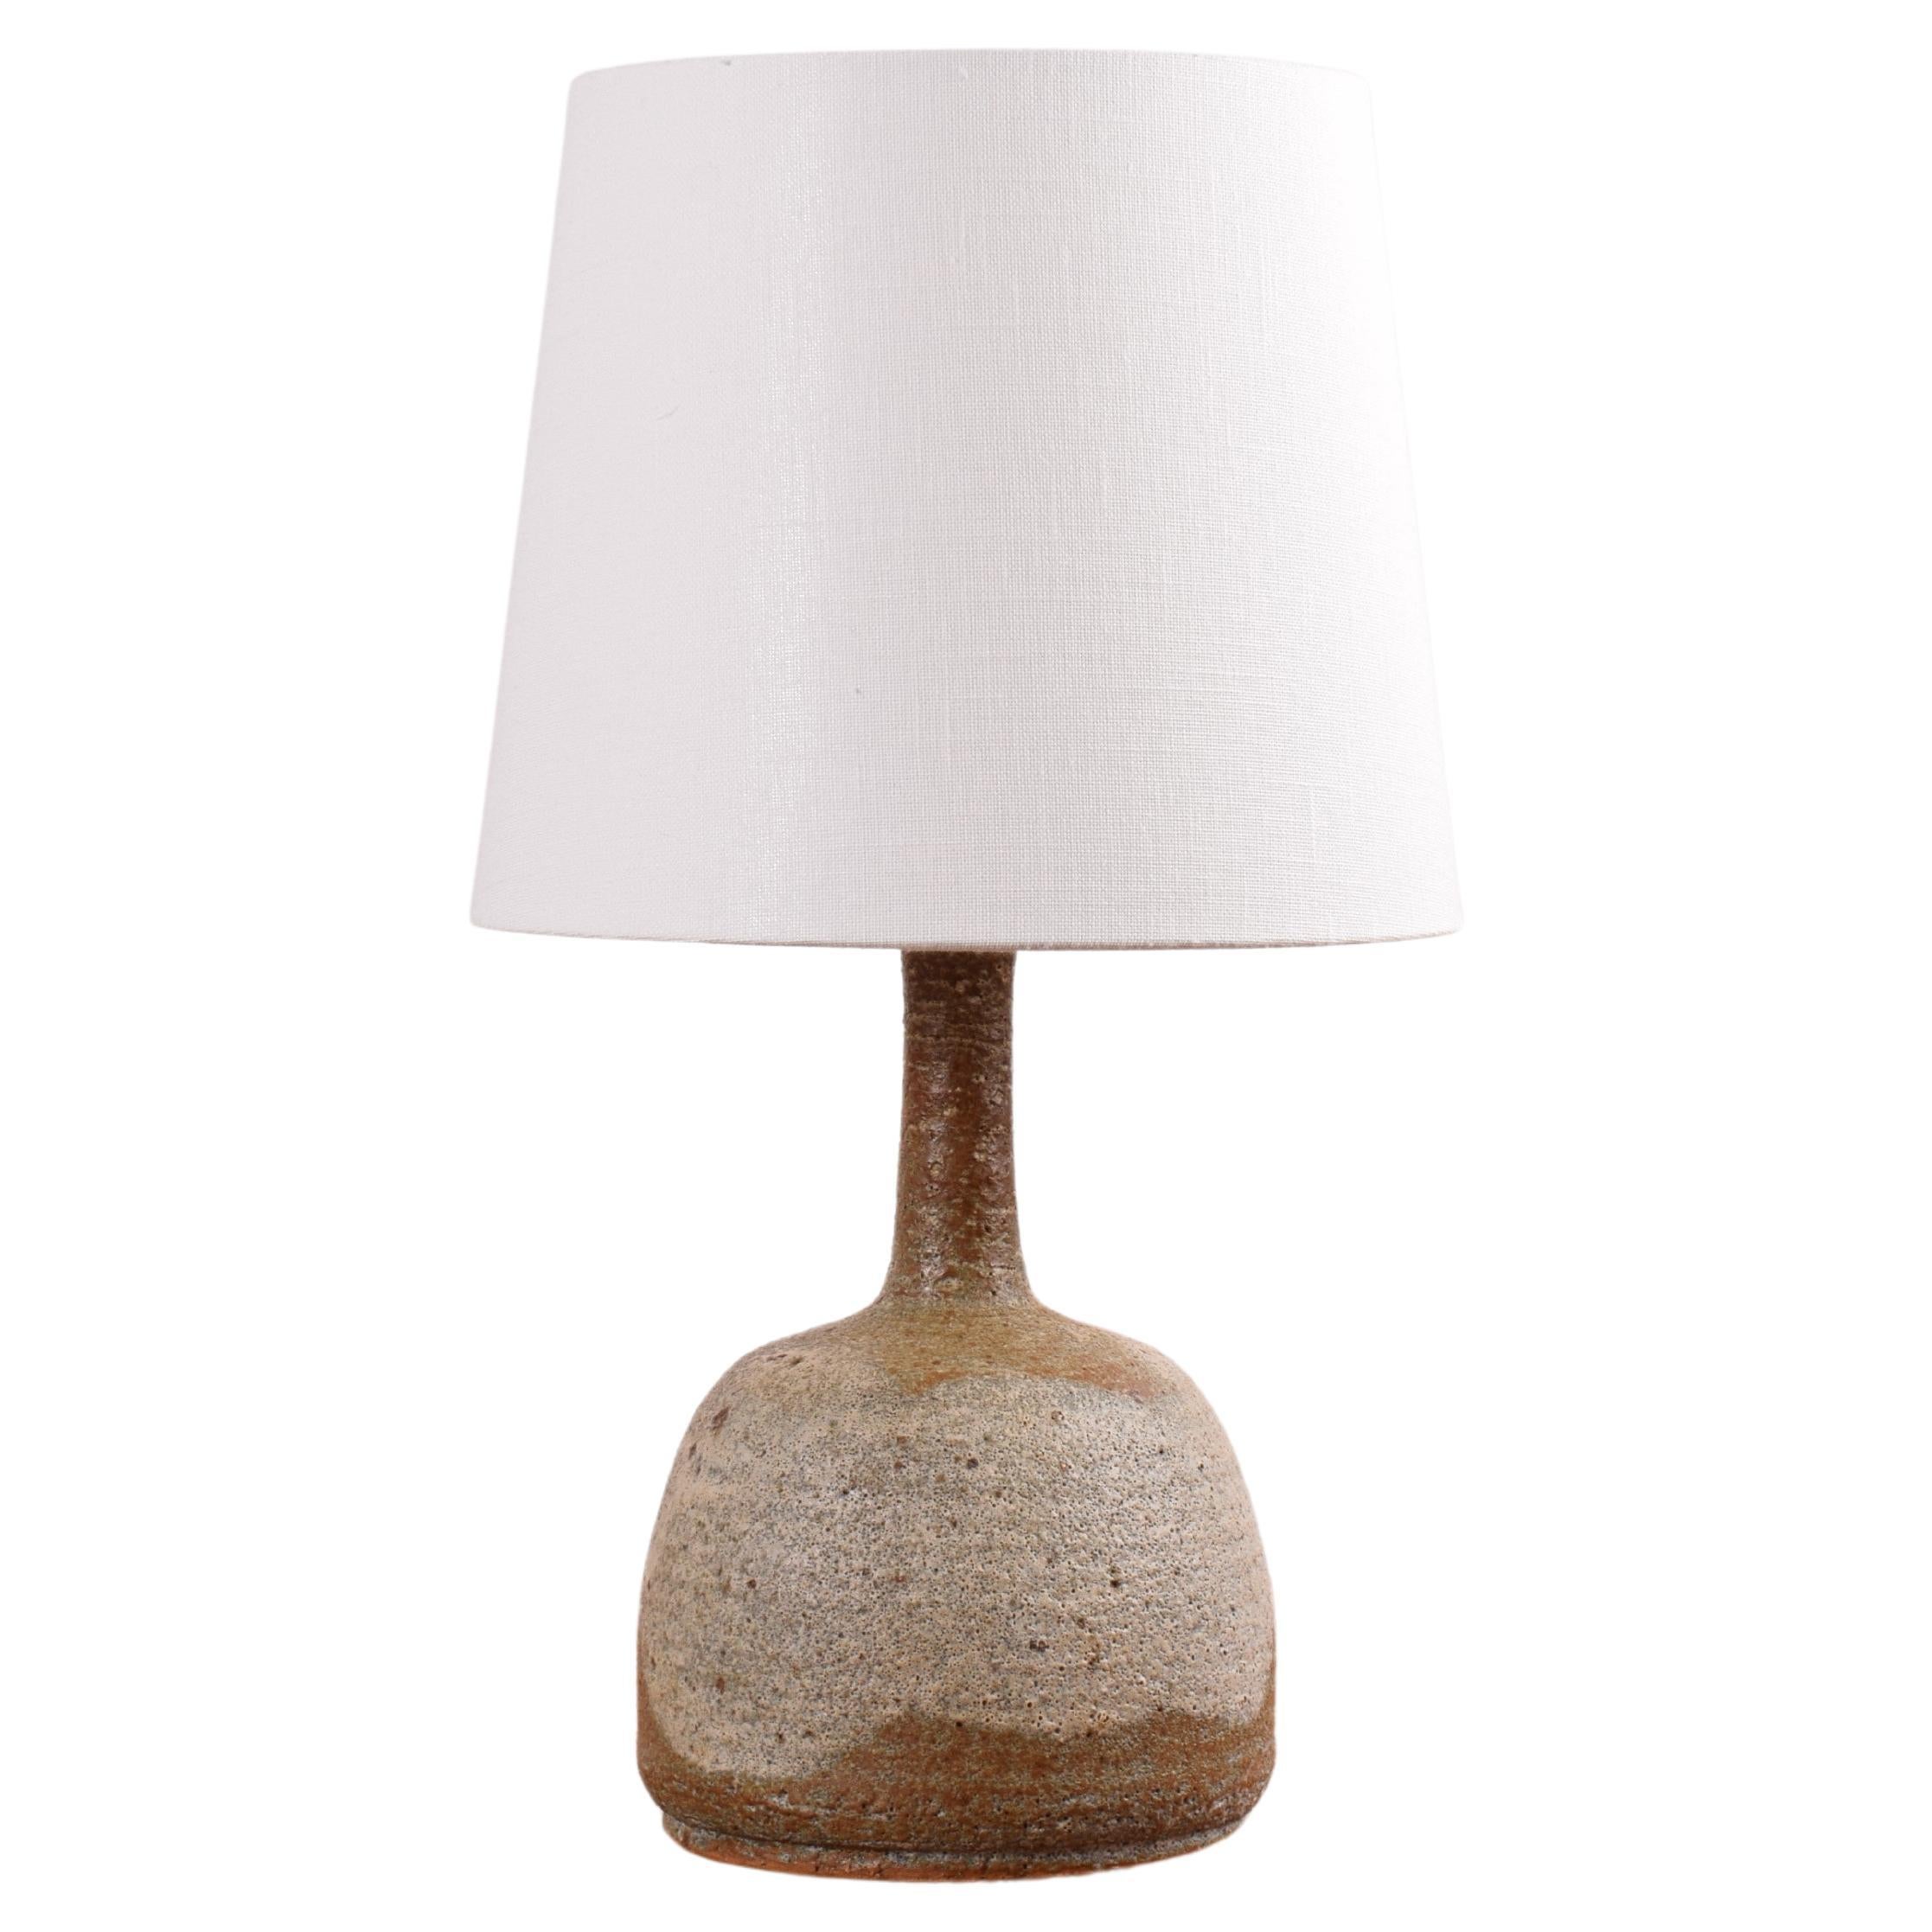 Danish Brutalist Table Lamp in Earthy Colors by Visby Tjæreborg, Ceramic, 1970s